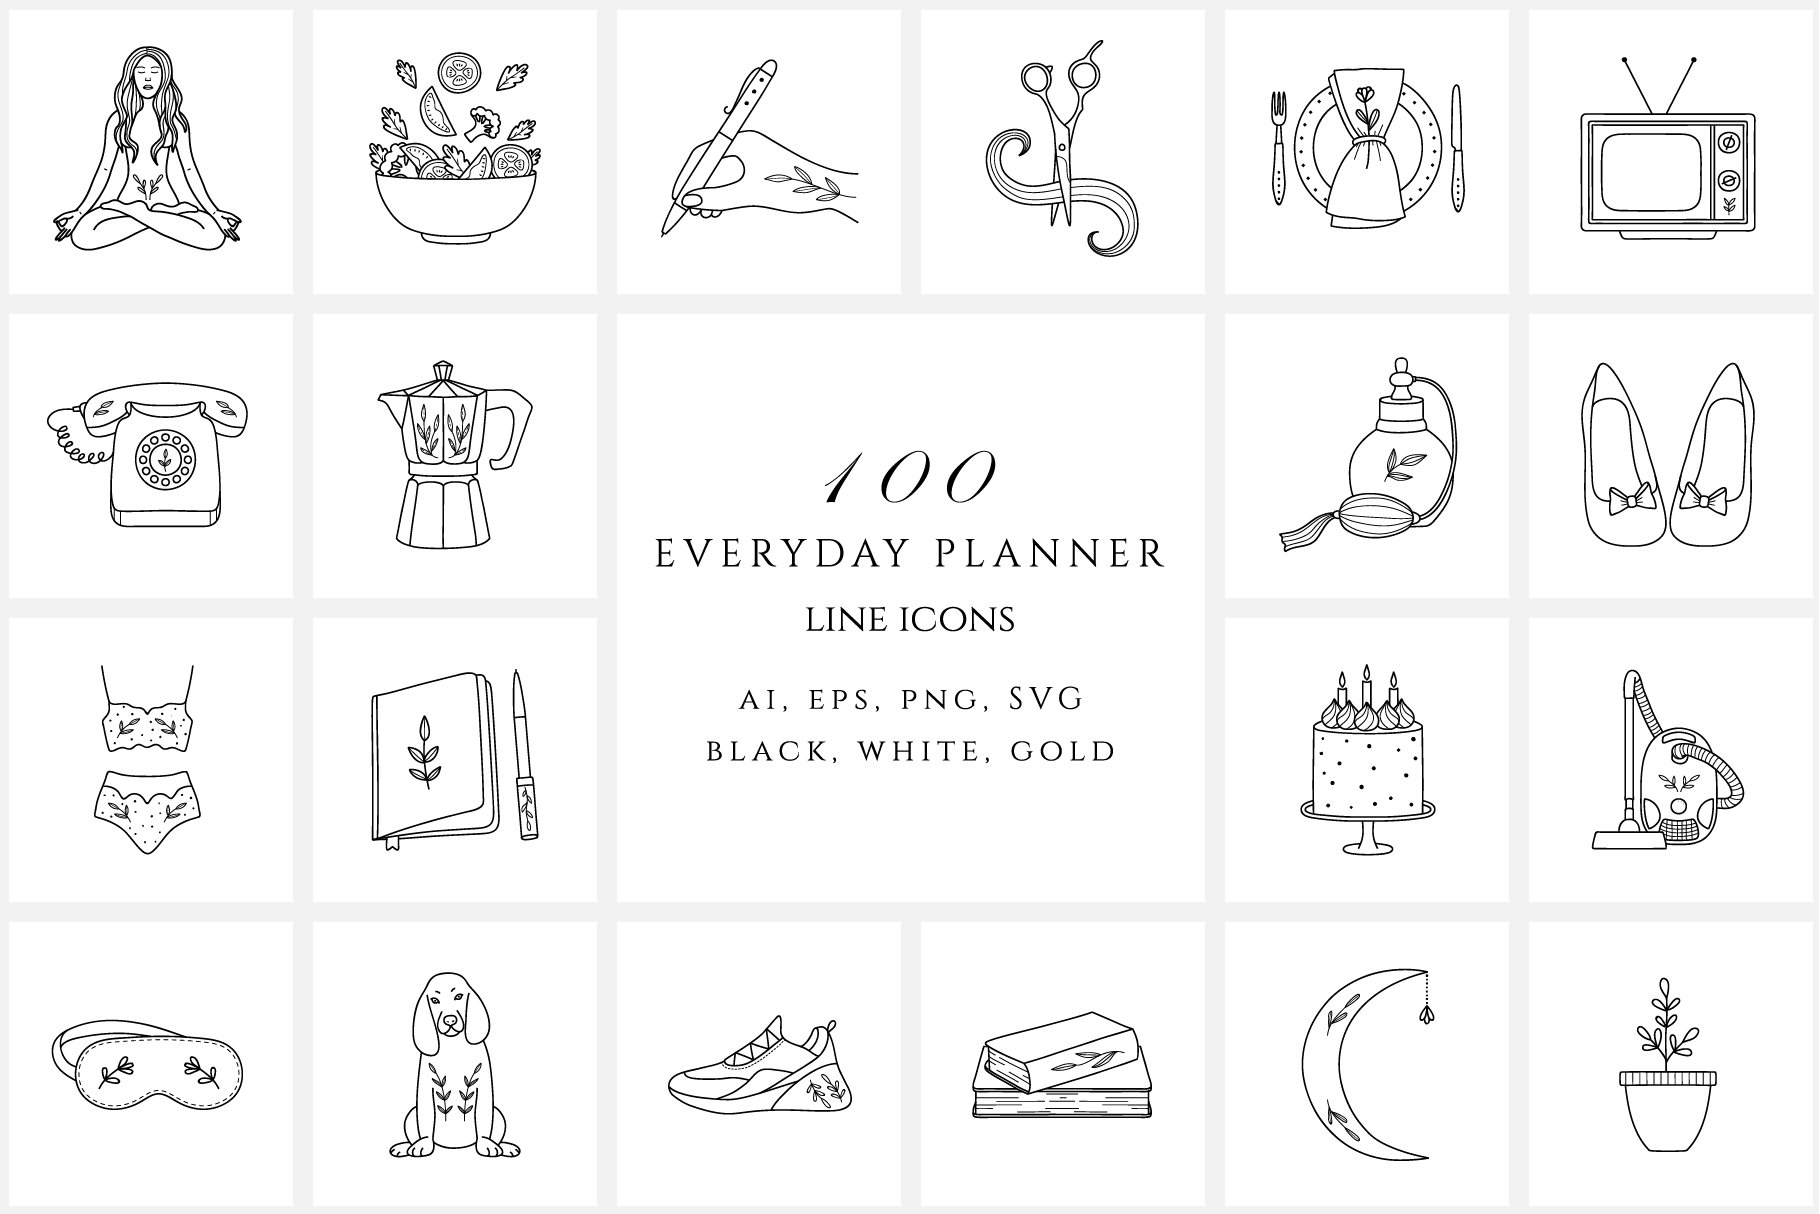 Everyday Planner Line Icon Set cover image.